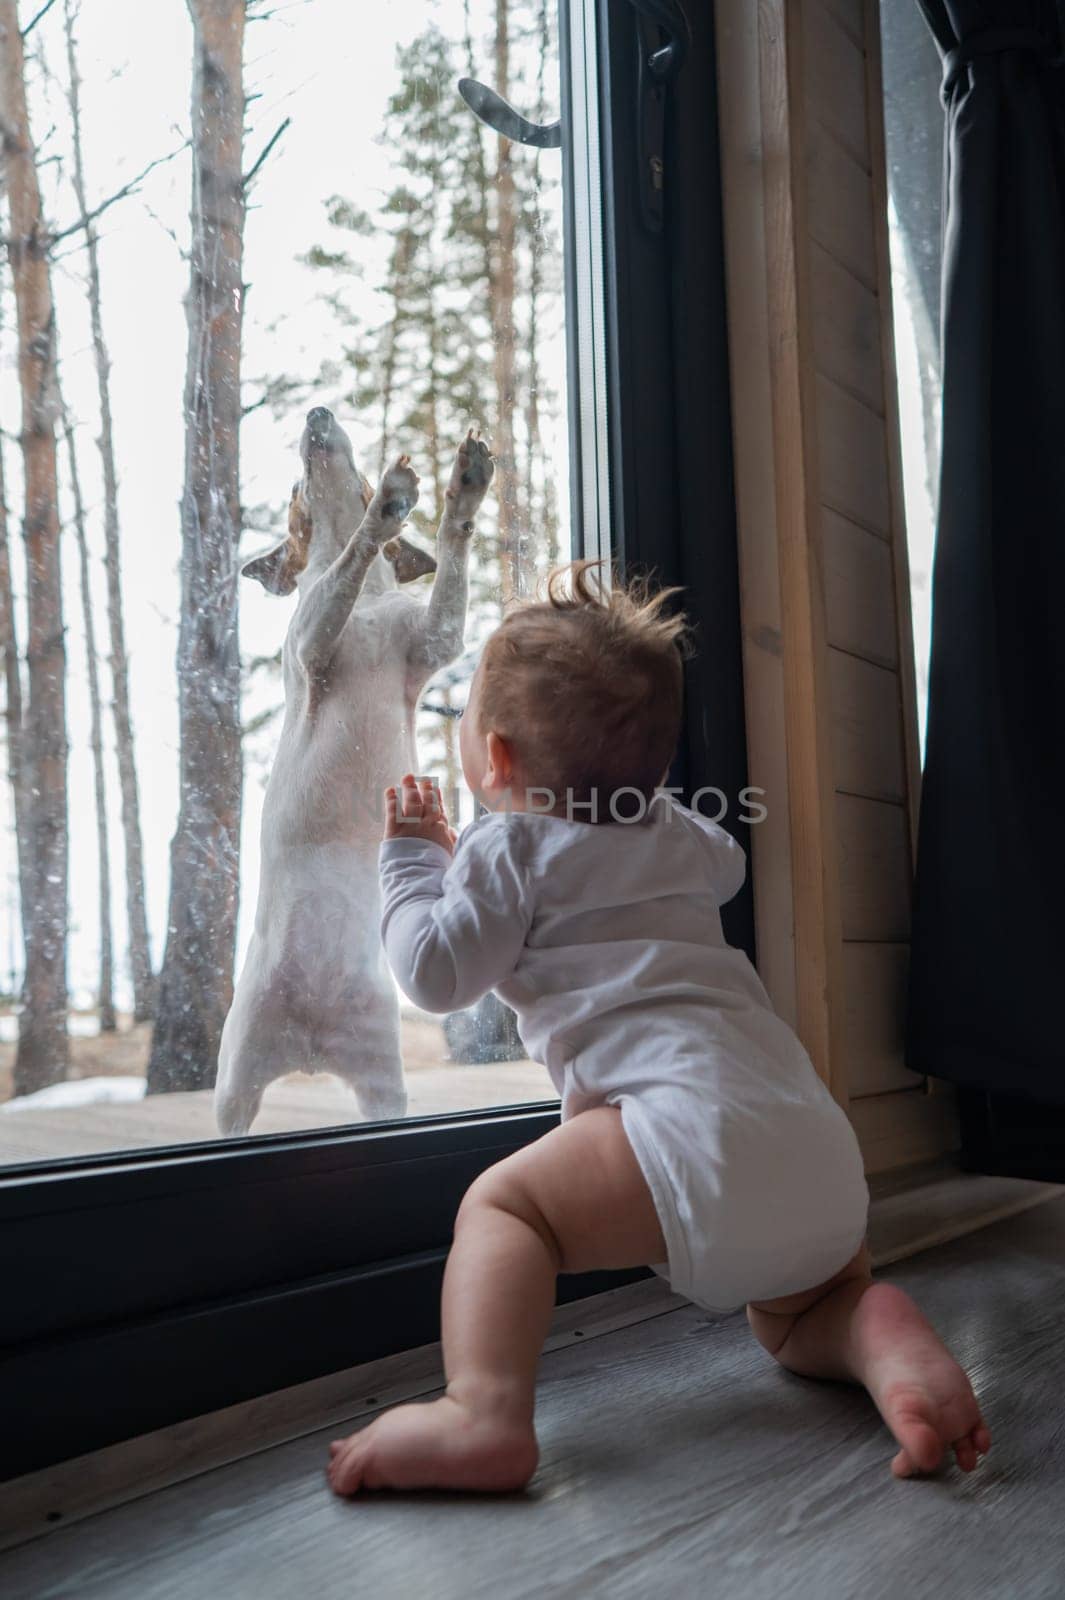 The dog stands at the patio window and knocks his paw on the glass towards the standing baby boy from the side. Vertical photo